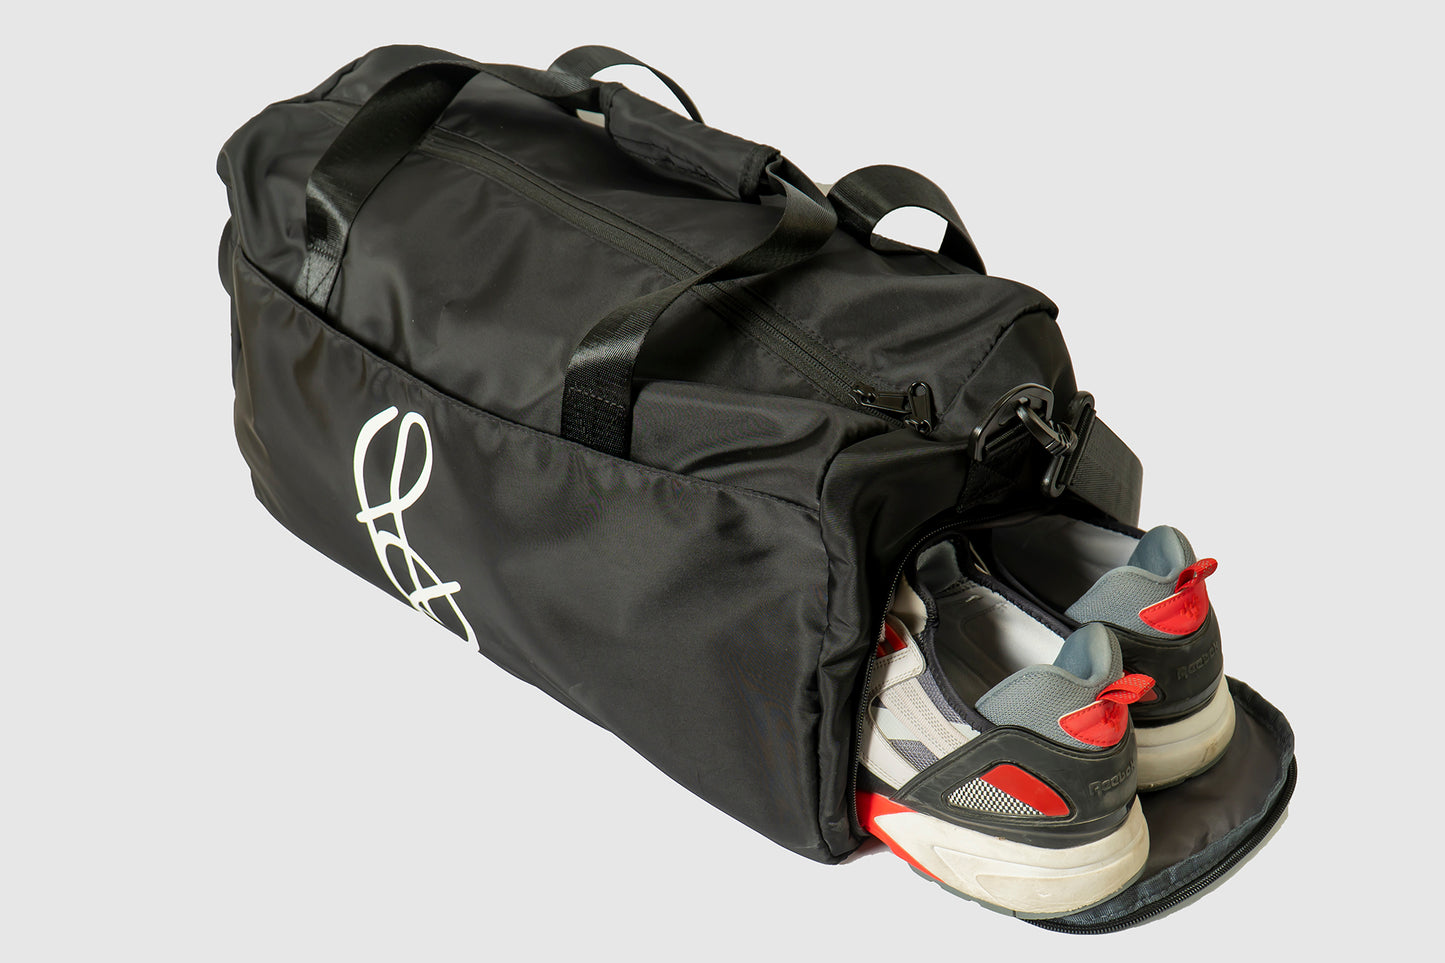 A water proof sports duffel bag with shoe compartment. 